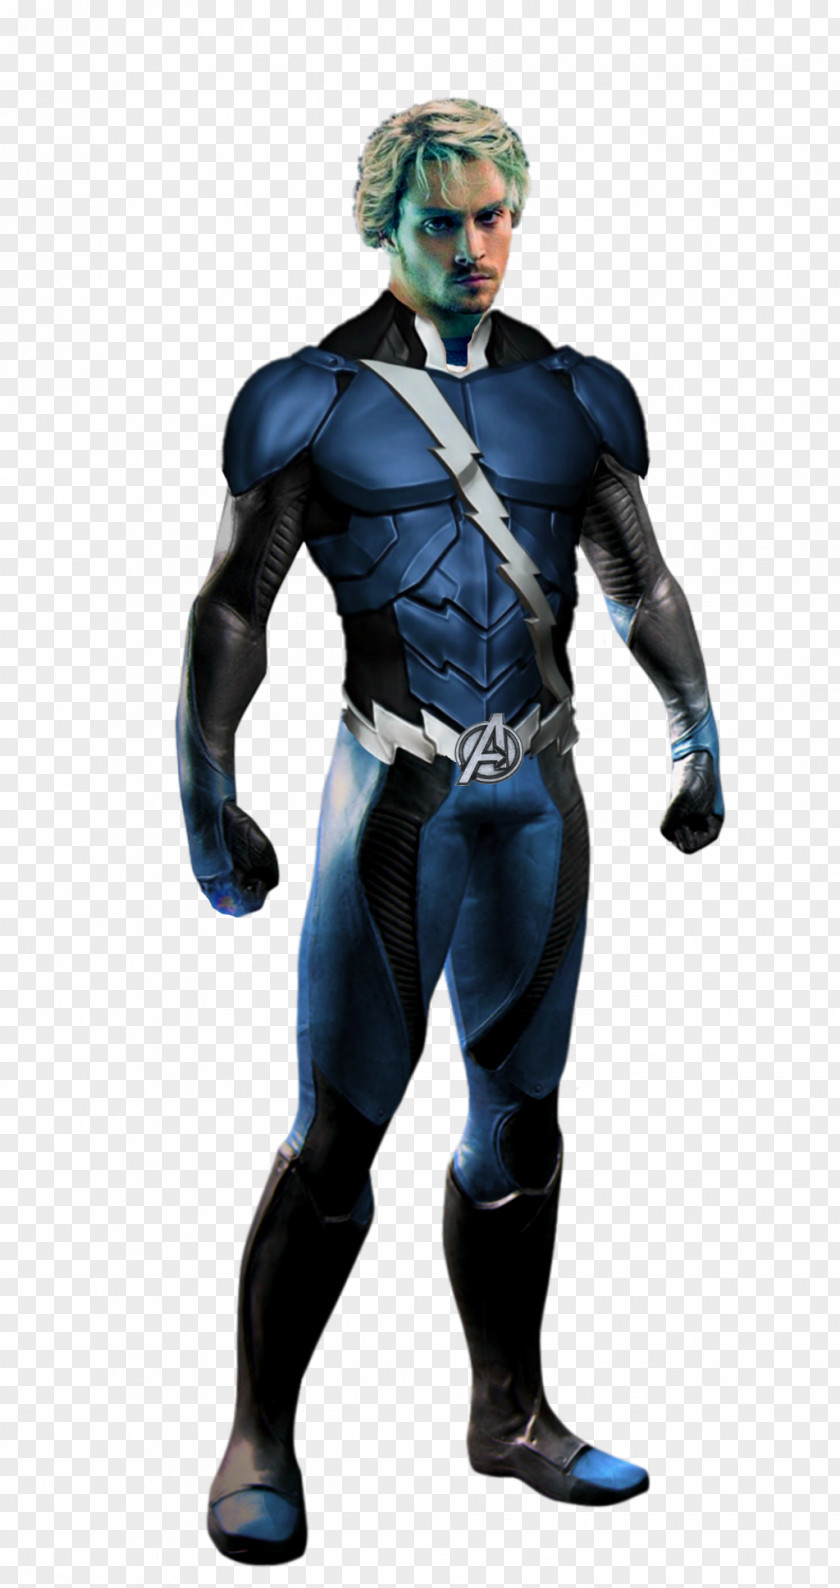 Captain America Quicksilver Avengers: Age Of Ultron Vision Marvel: Avengers Alliance PNG